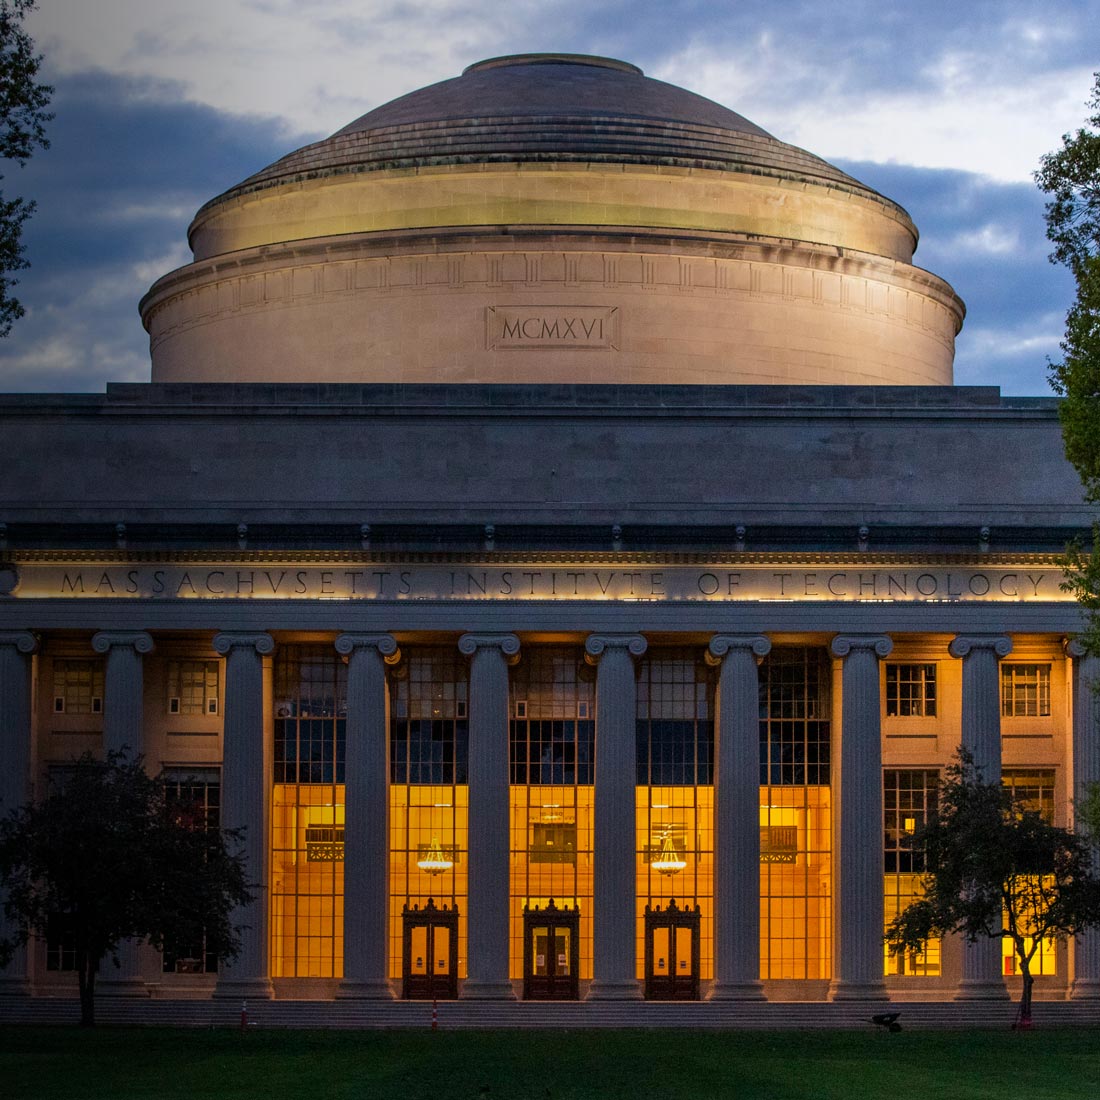 Image of the MIT Dome in Killian Court